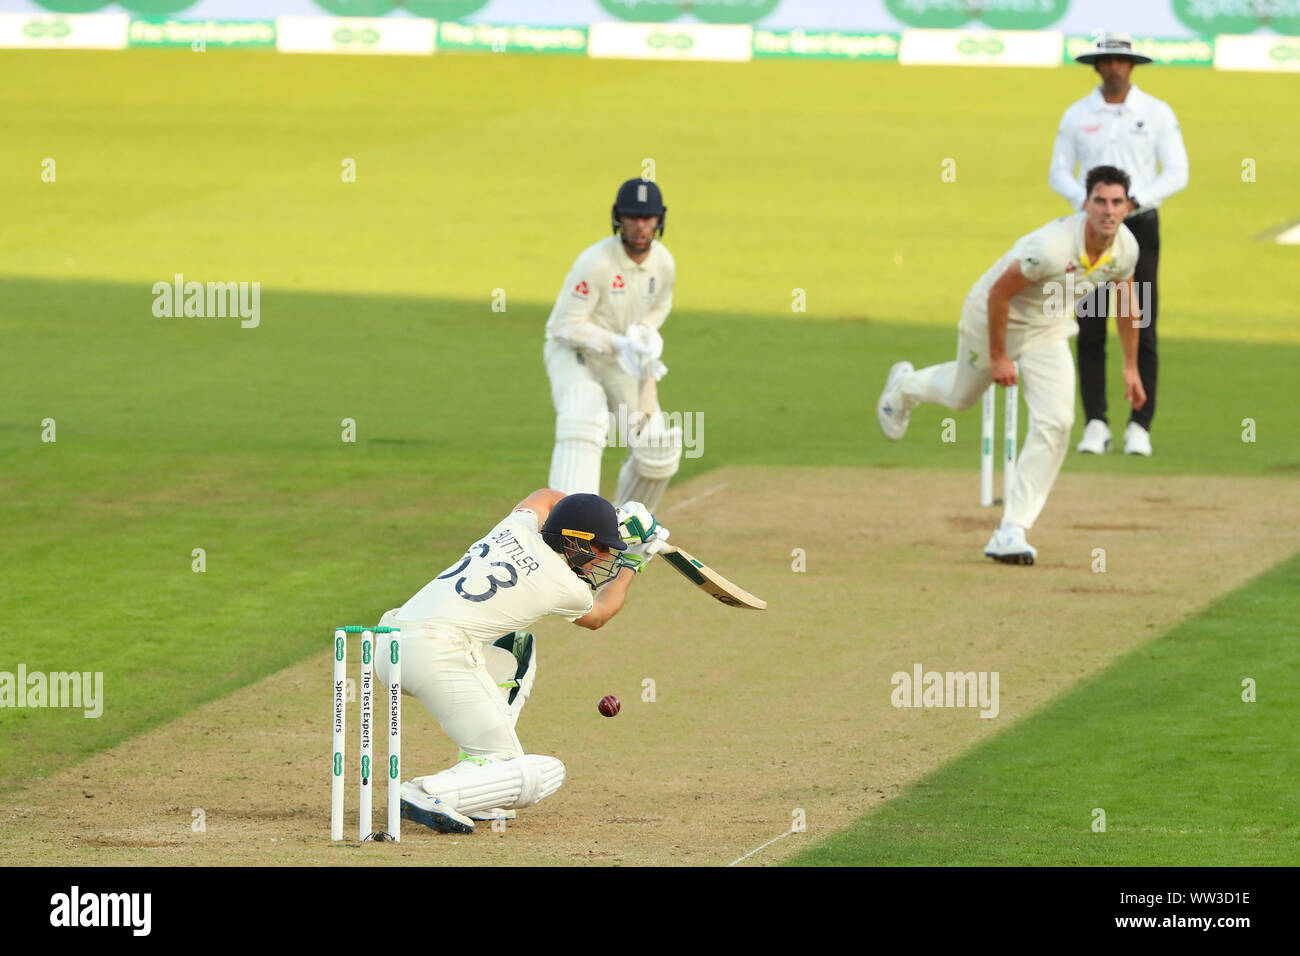 LONDON, ENGLAND. 12 SEPTEMBER 2019: Jos Buttler of England plays a shot as Pat Cummins of Australia bowls the ball during day one of the 5th Specsavers Ashes Test Match, at The Kia Oval Cricket Ground, London, England. Stock Photo